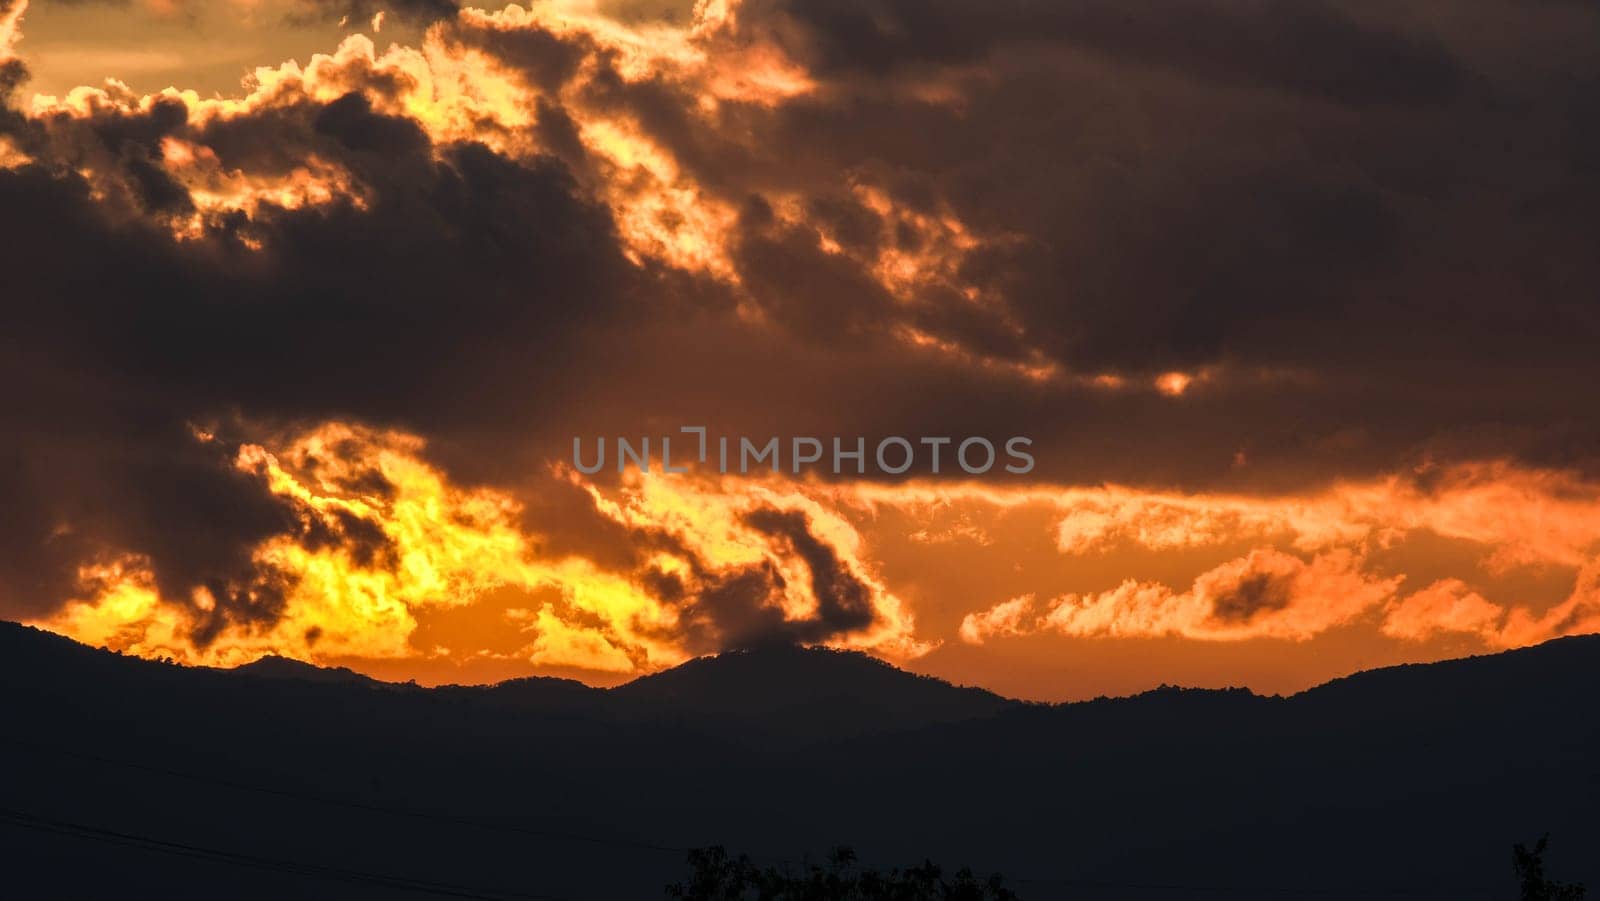 Beautiful dramatic sky with clouds at sunset or sunrise. Sunset sky at dusk in the evening with natural sky background with golden orange clouds.